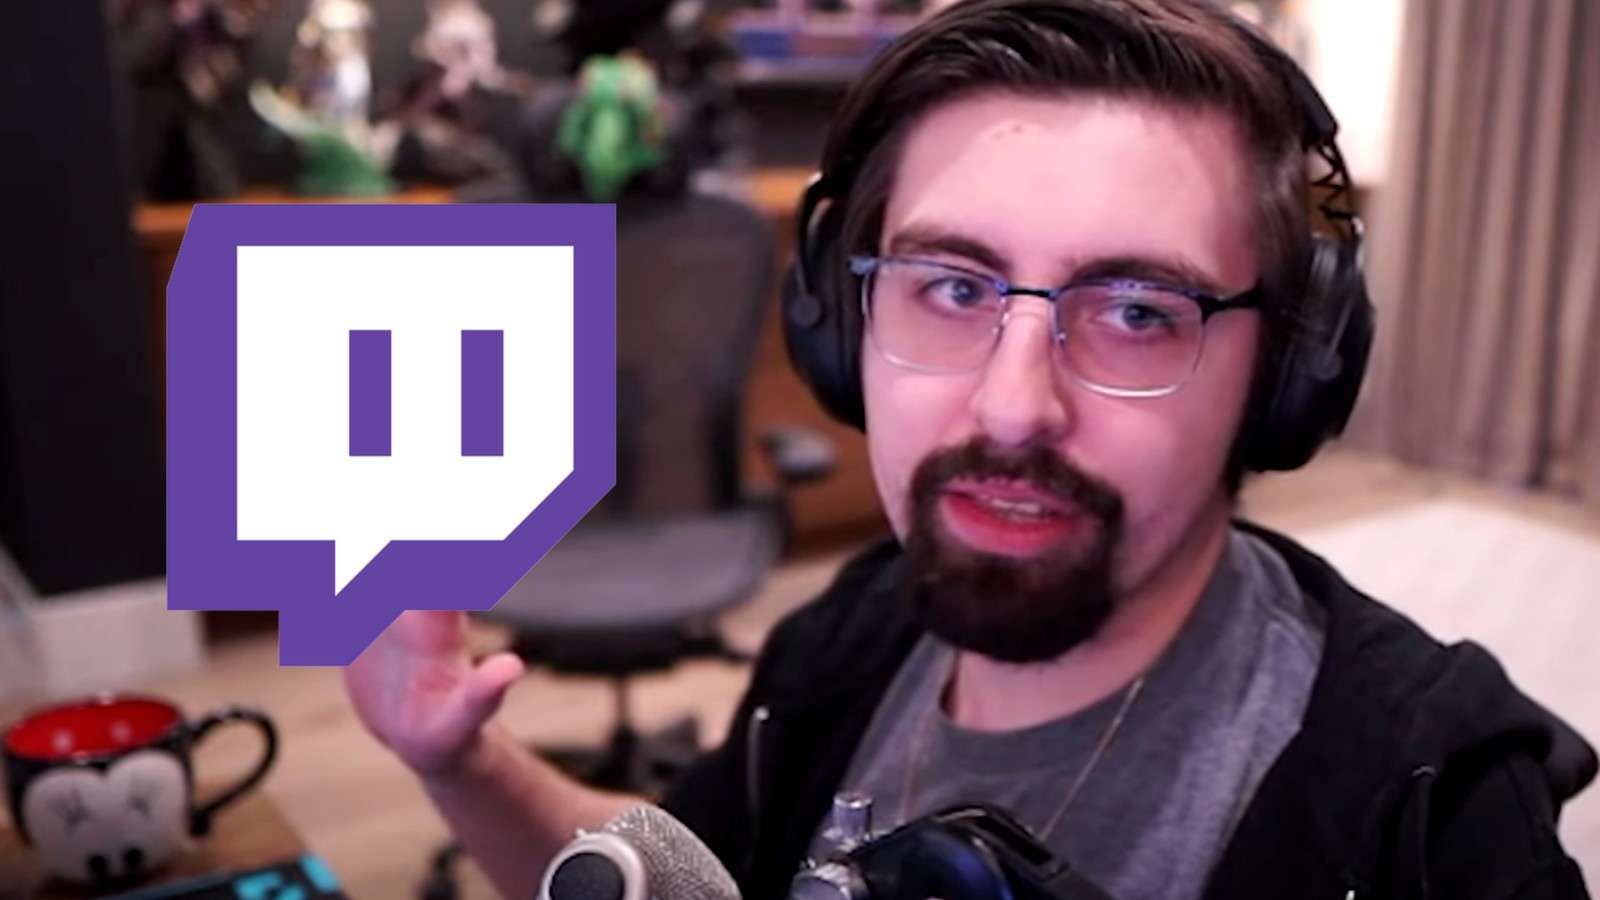 Shroud faces the camera next to the Twitch logo